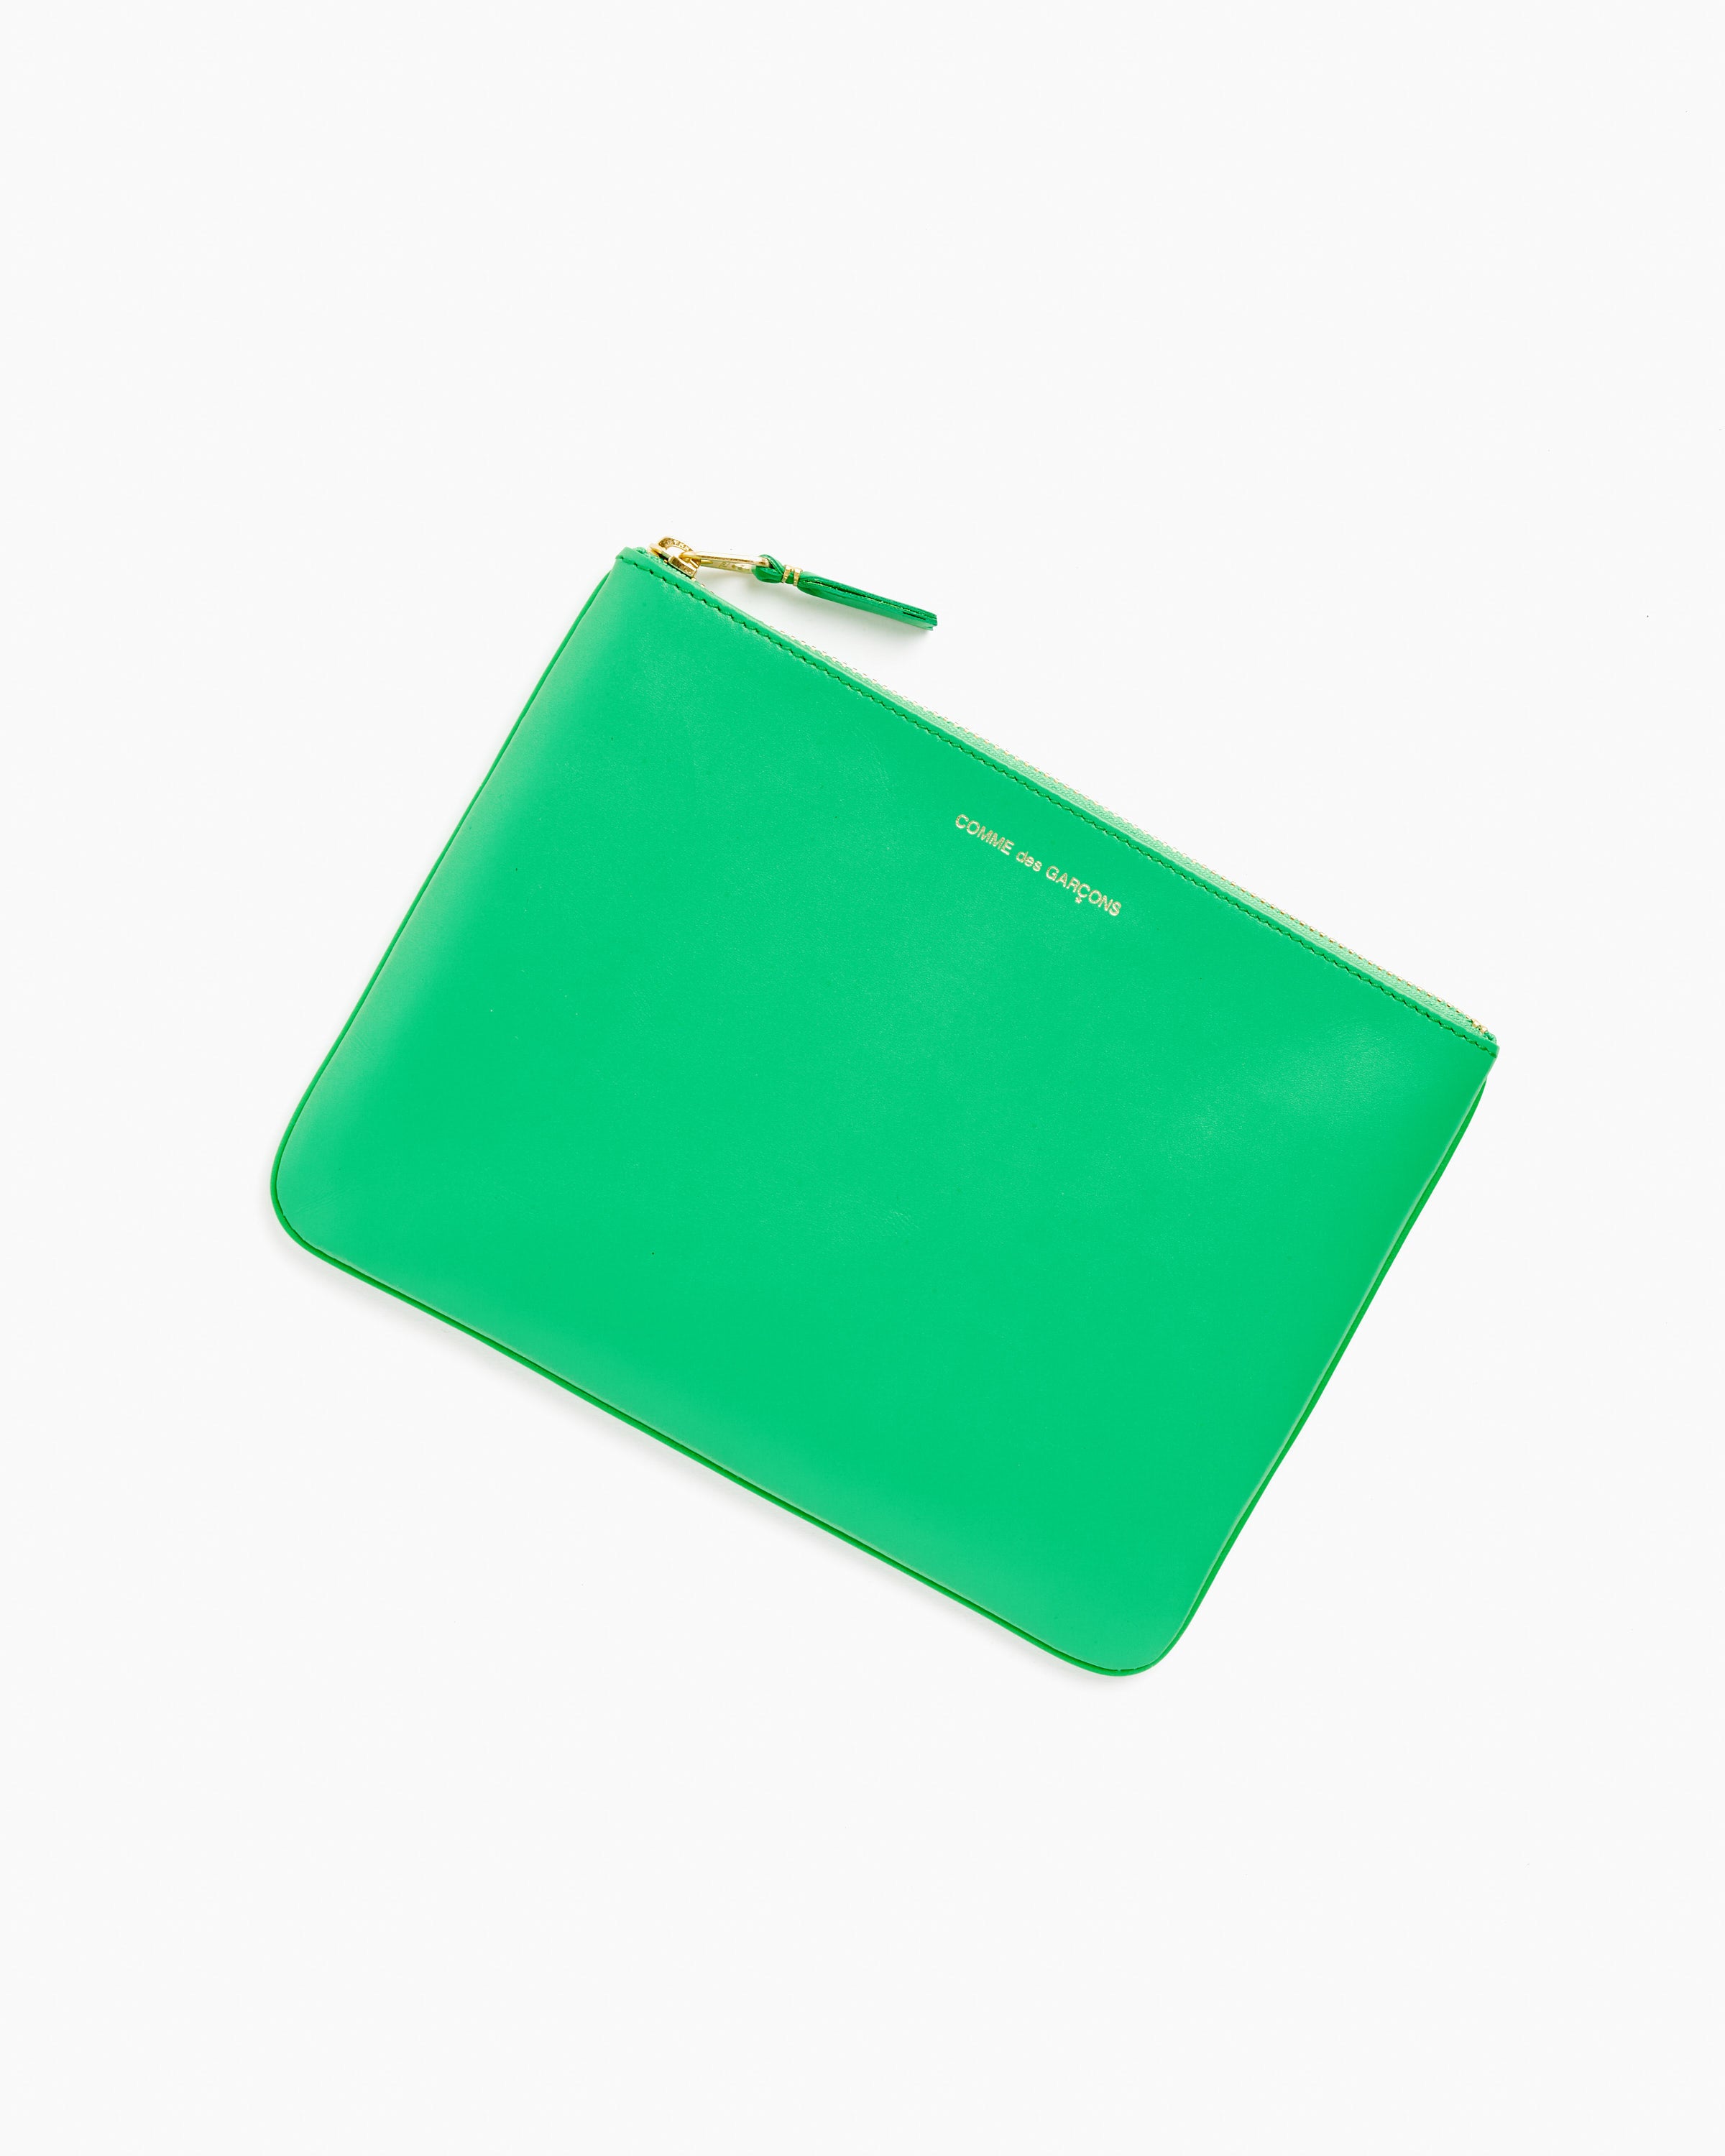 Classic Zip Pouch in Green